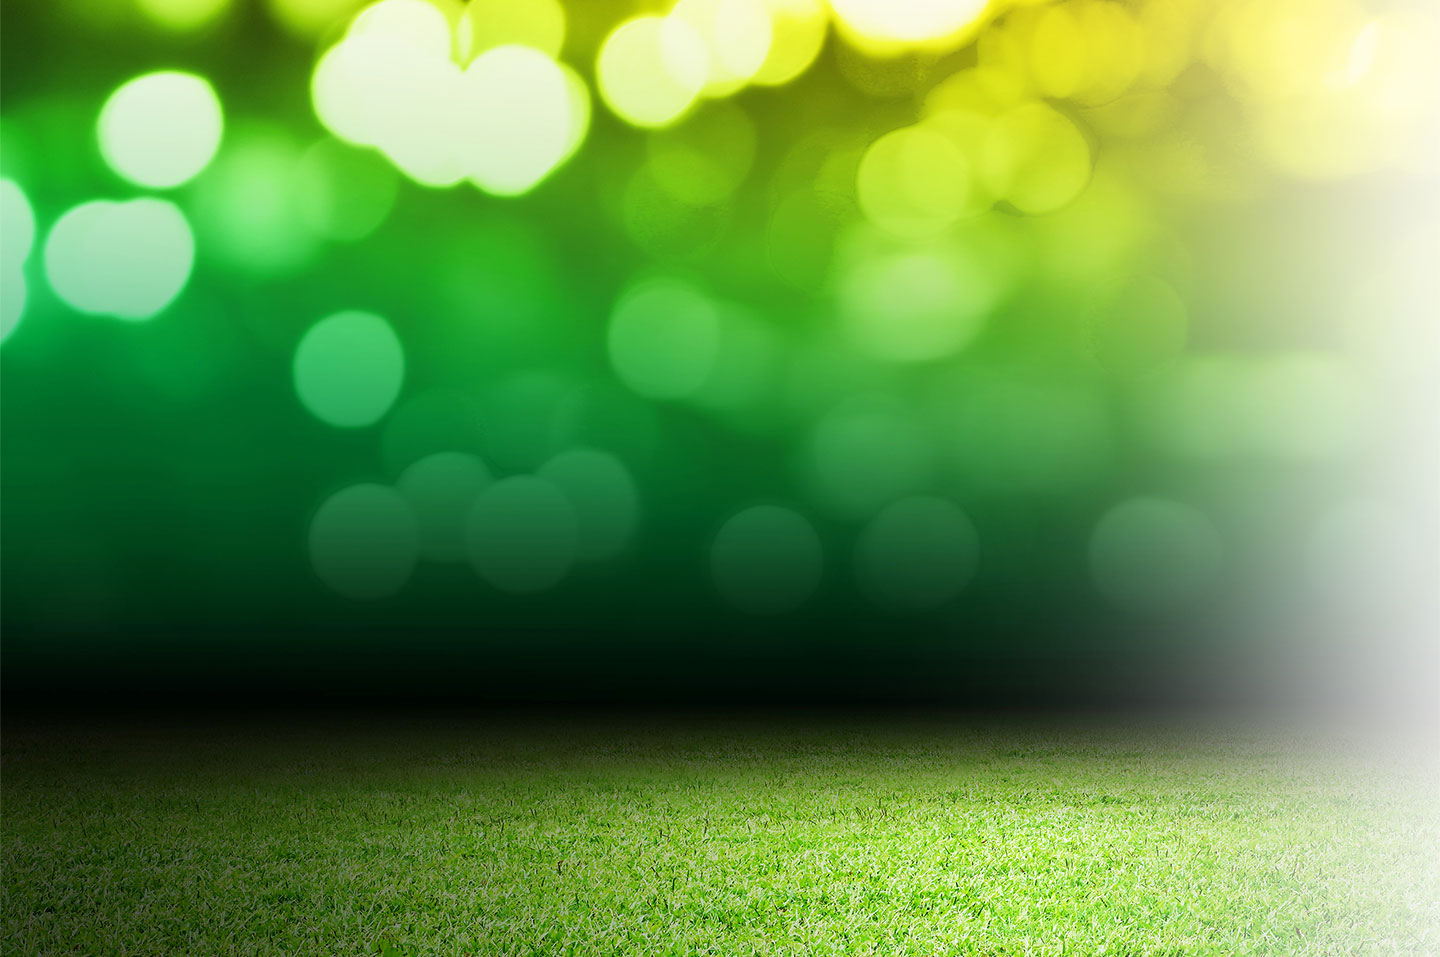 Blurred lights and grass background